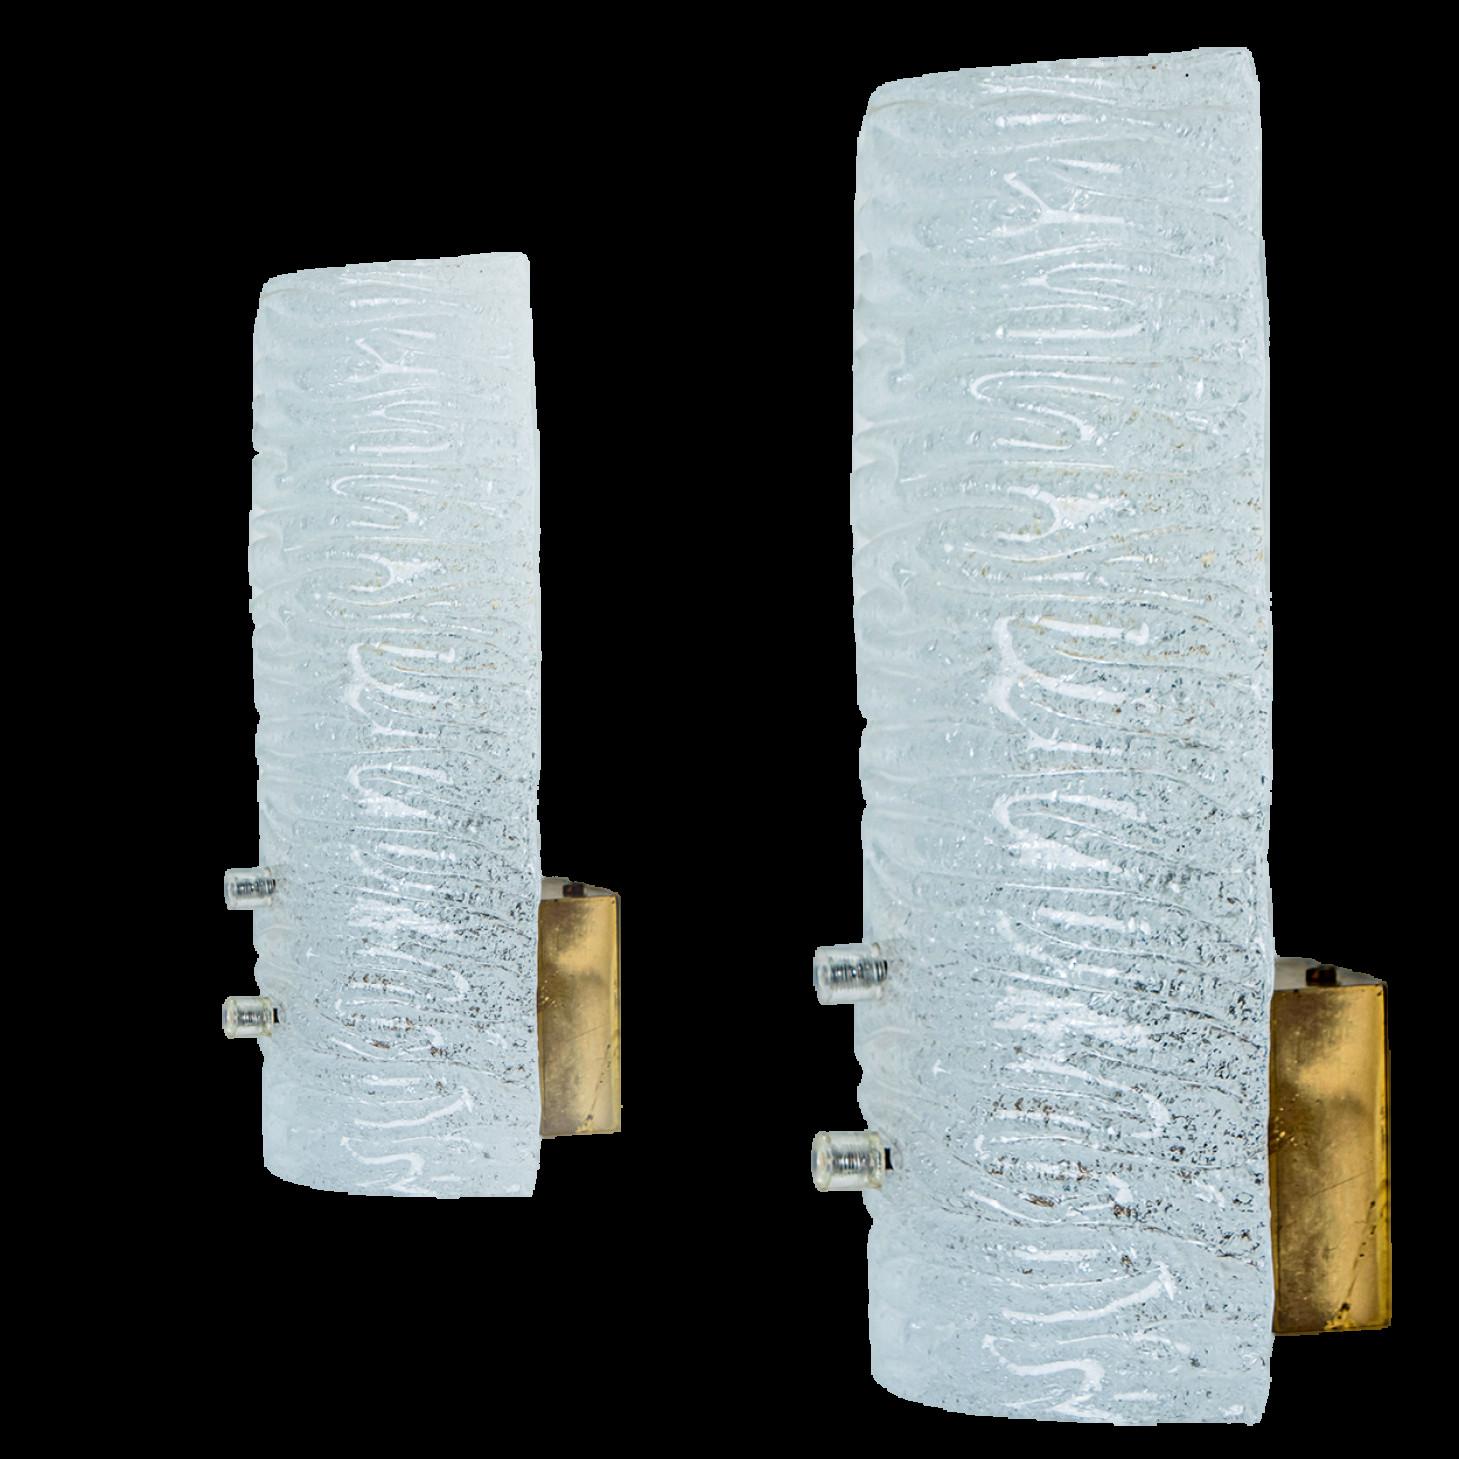 Beautiful and elegant modern brass wall lights or sconces, manufactured by J.T. Kalmar Austria in the 1960s. Lovely design, executed to a very high standard.

Each light has one ribble textured glass column on it. Clean lines to complement all